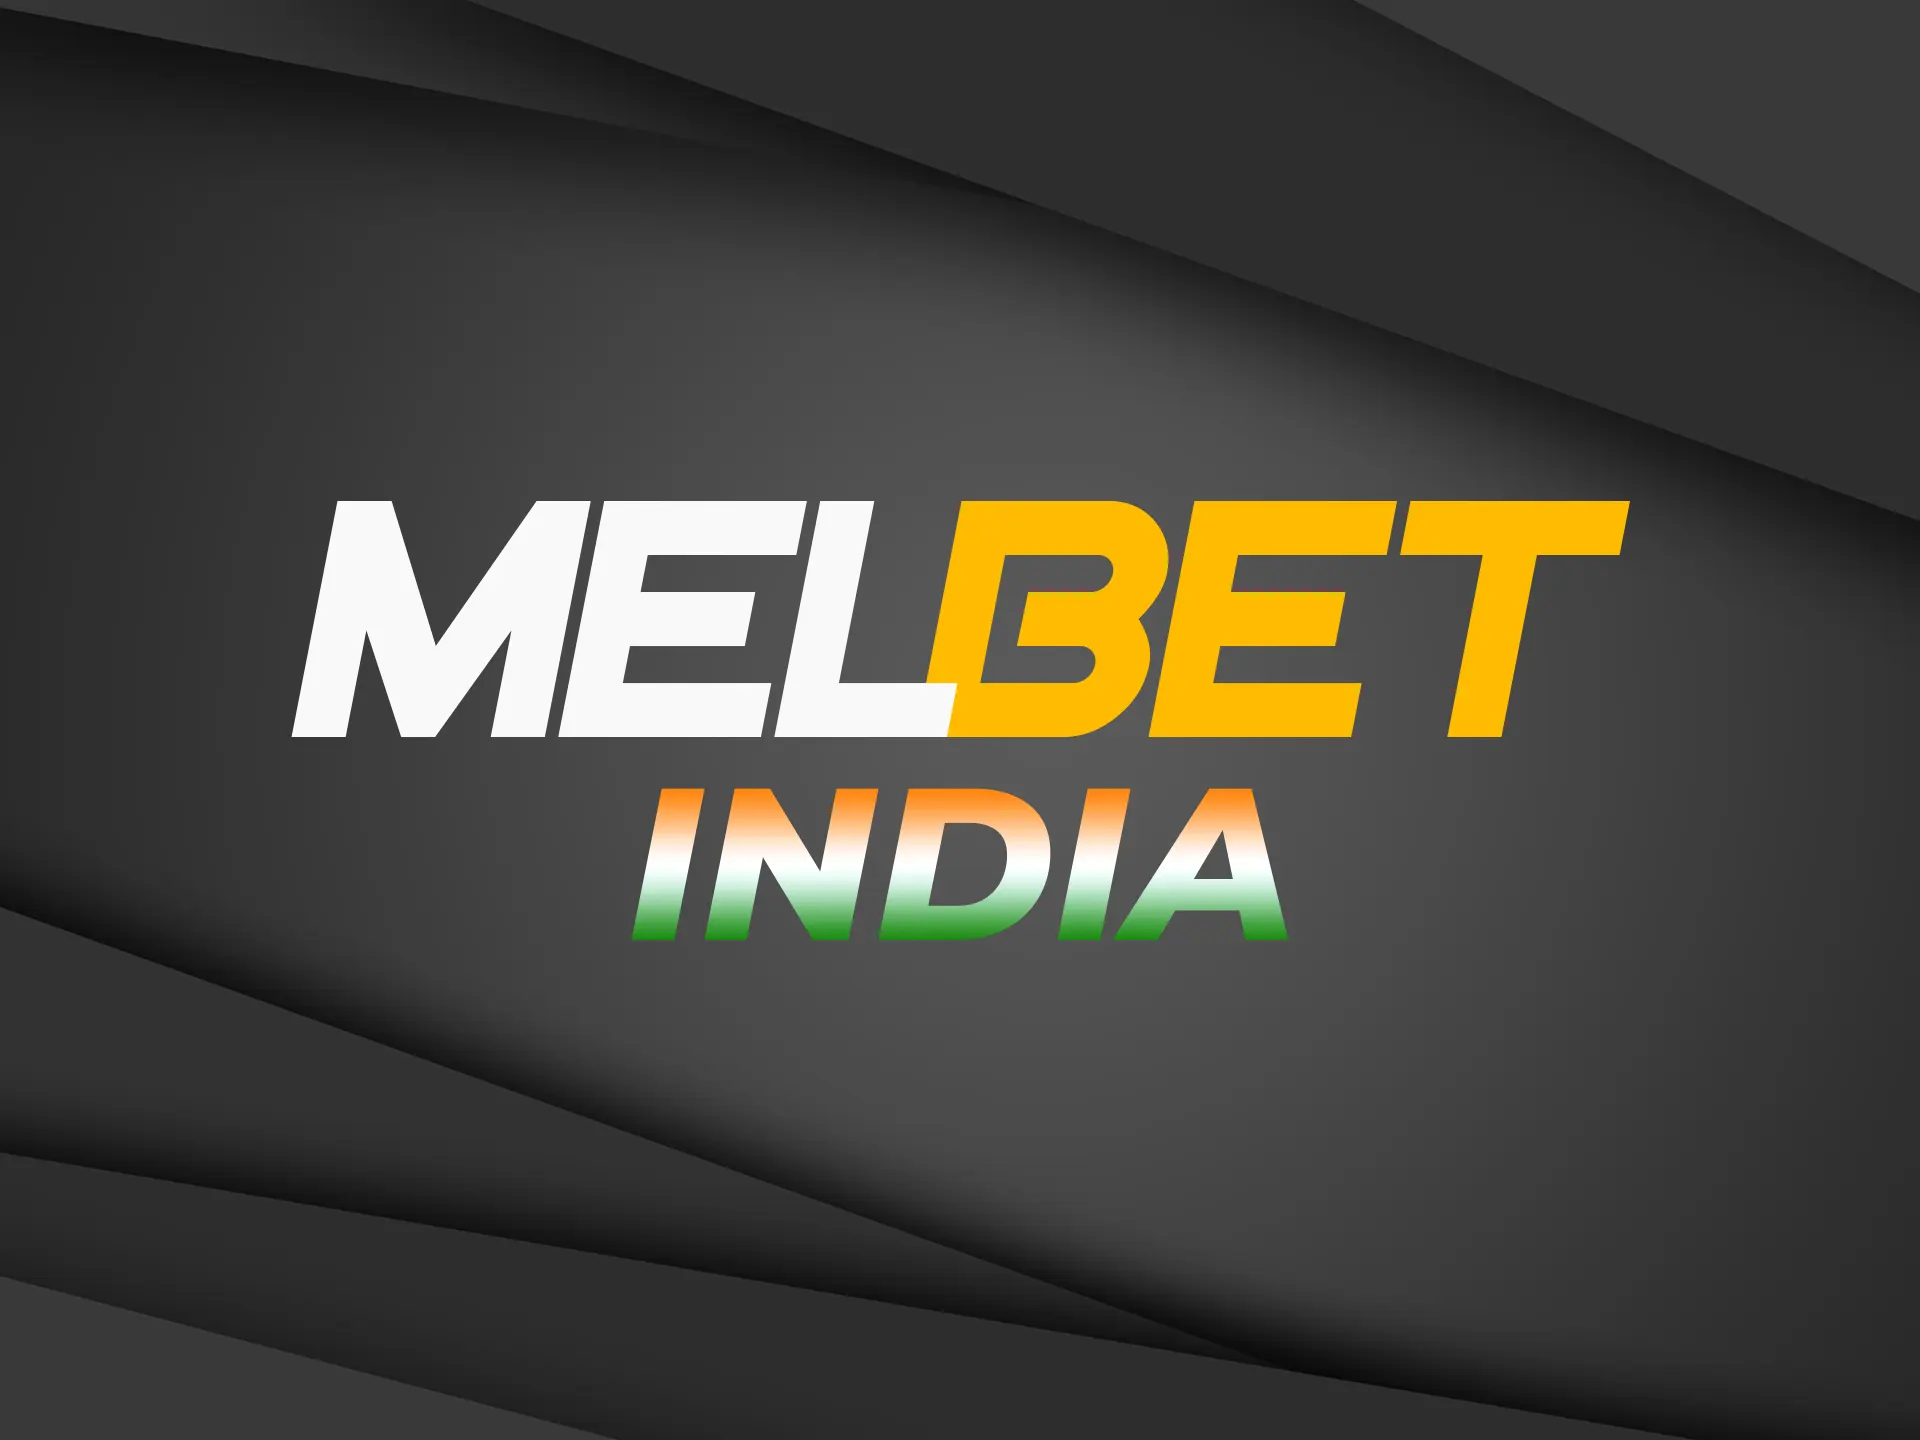 More information about the leading bookmaker Melbet in the Indian market.